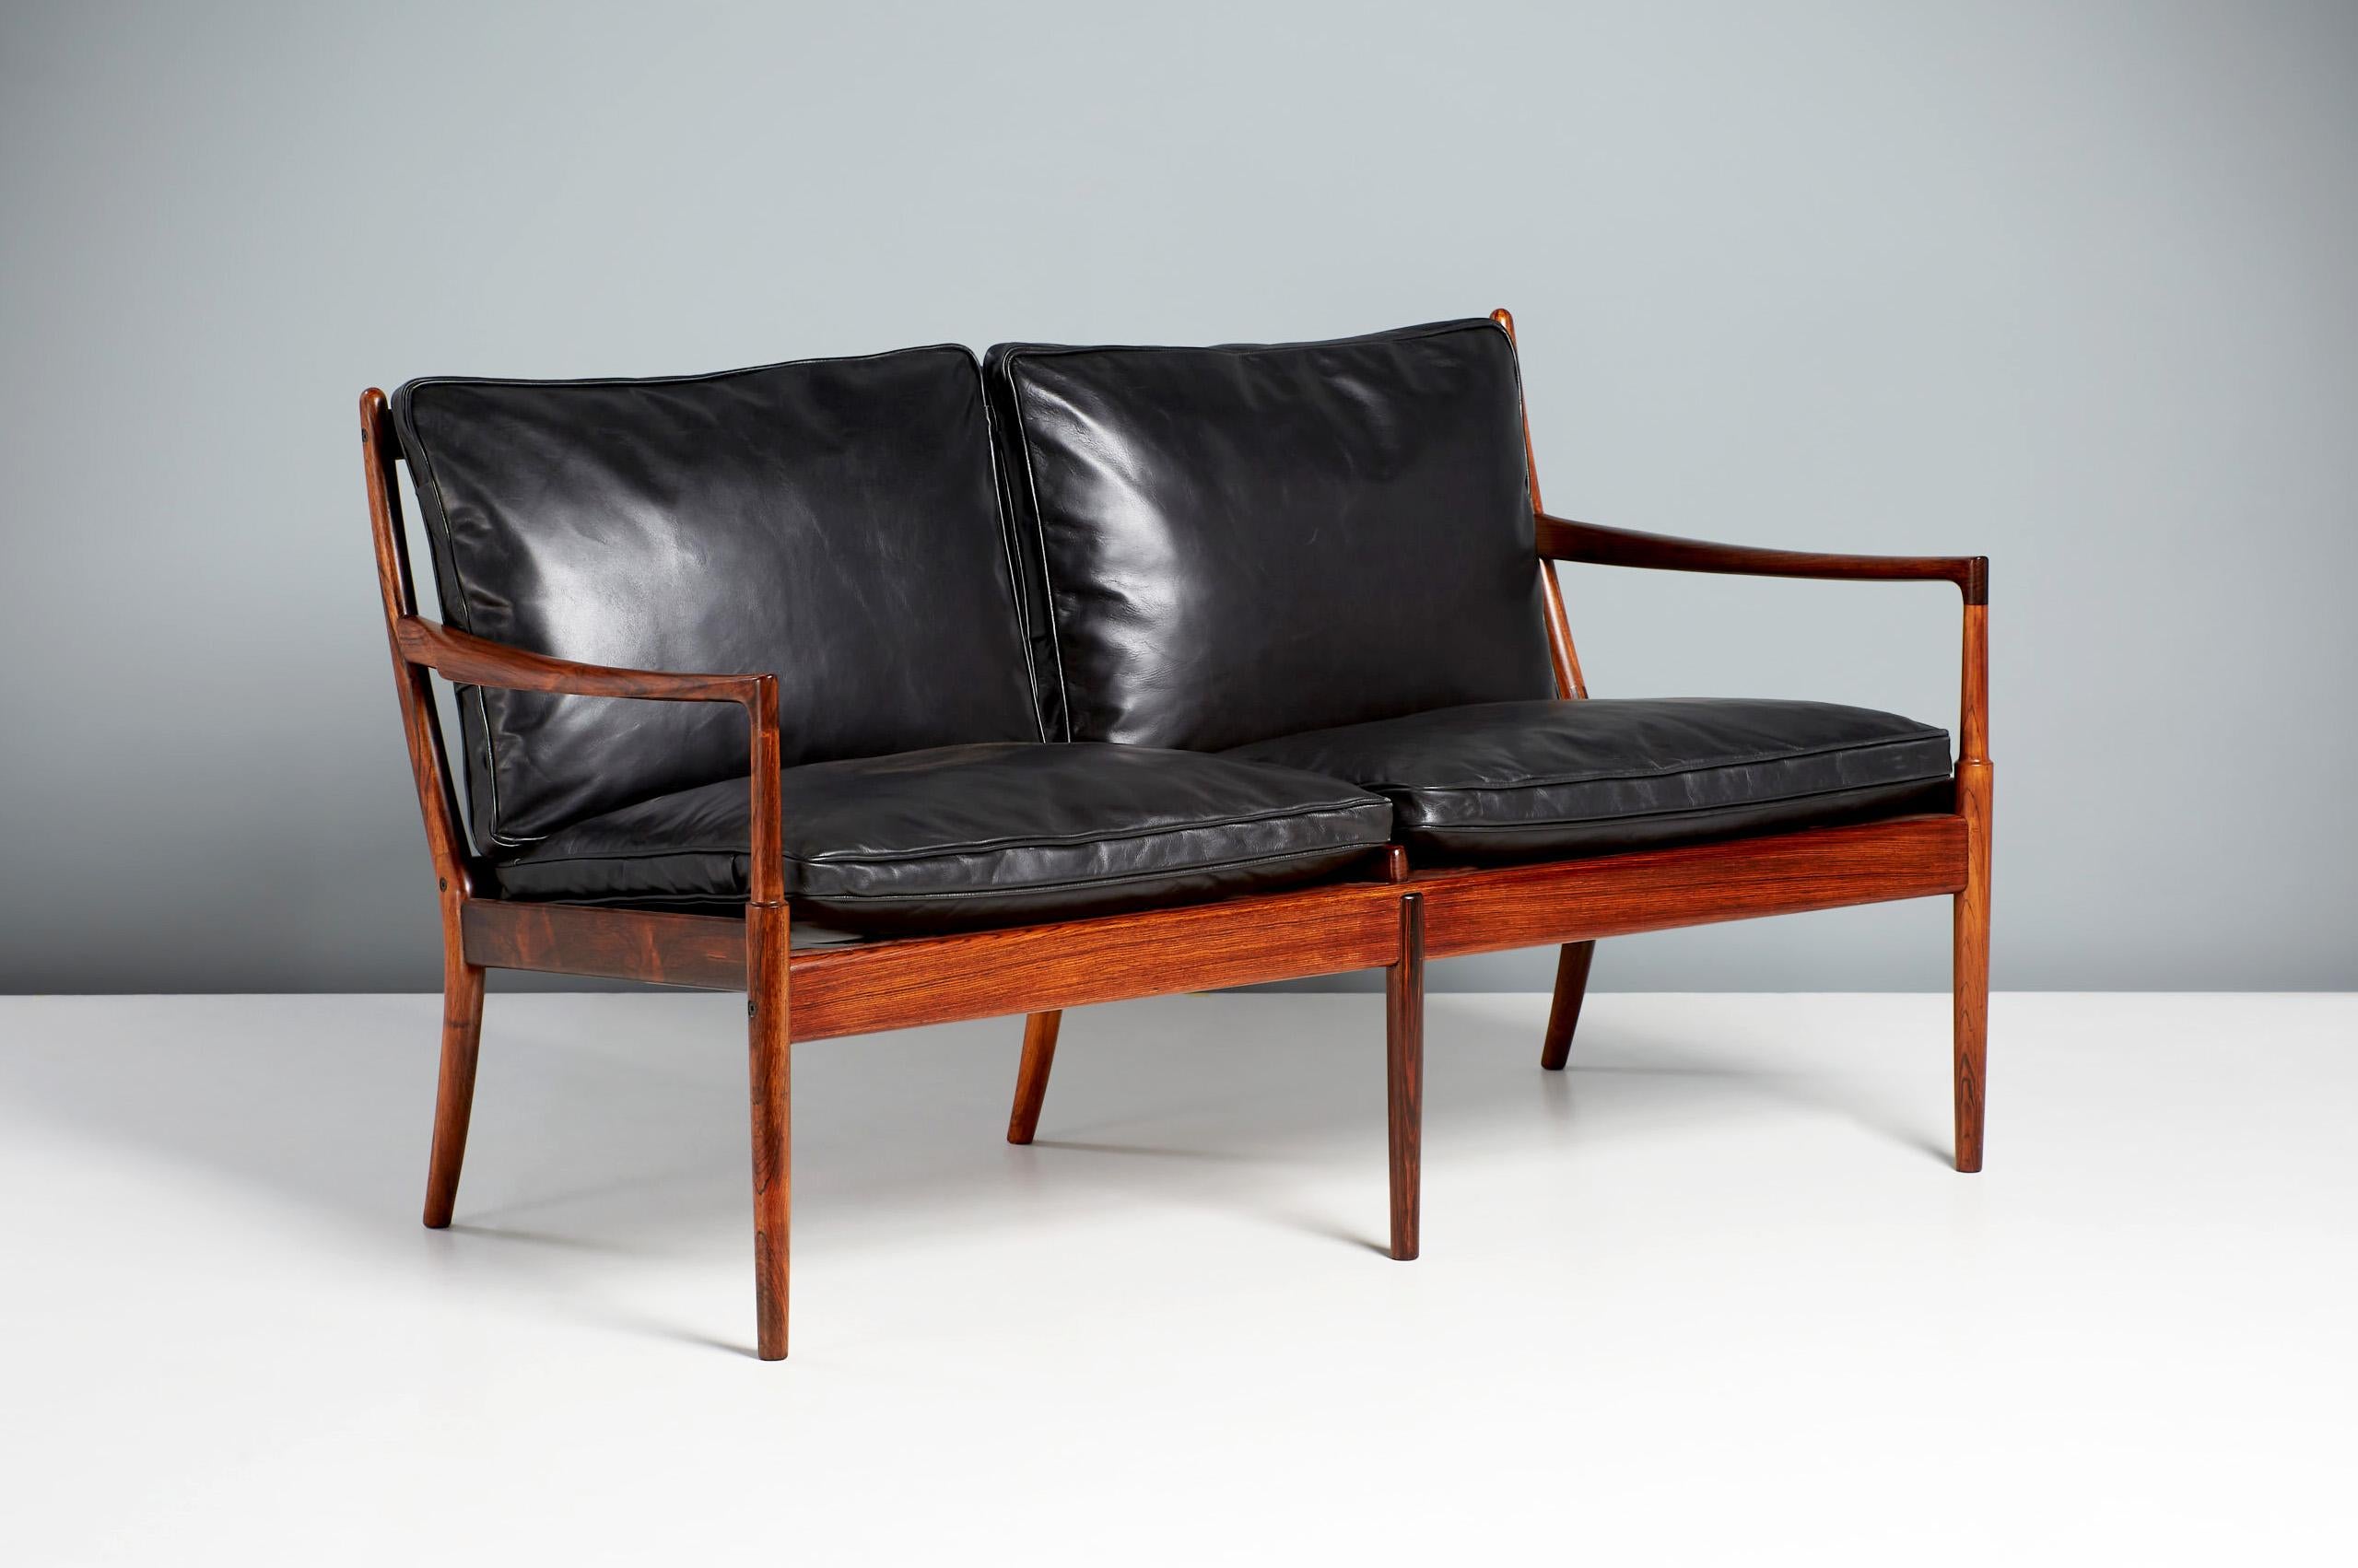 Ib Kofod-Larsen - Samso Sofa, c1958

A rarely seen small sofa produced by Olof Perssons Fatoljindustri (OPE), Jonkoping, Sweden. This 2-seat sofa was offered in highly limited quantities alongside the iconic Samso chair. The frame is made from